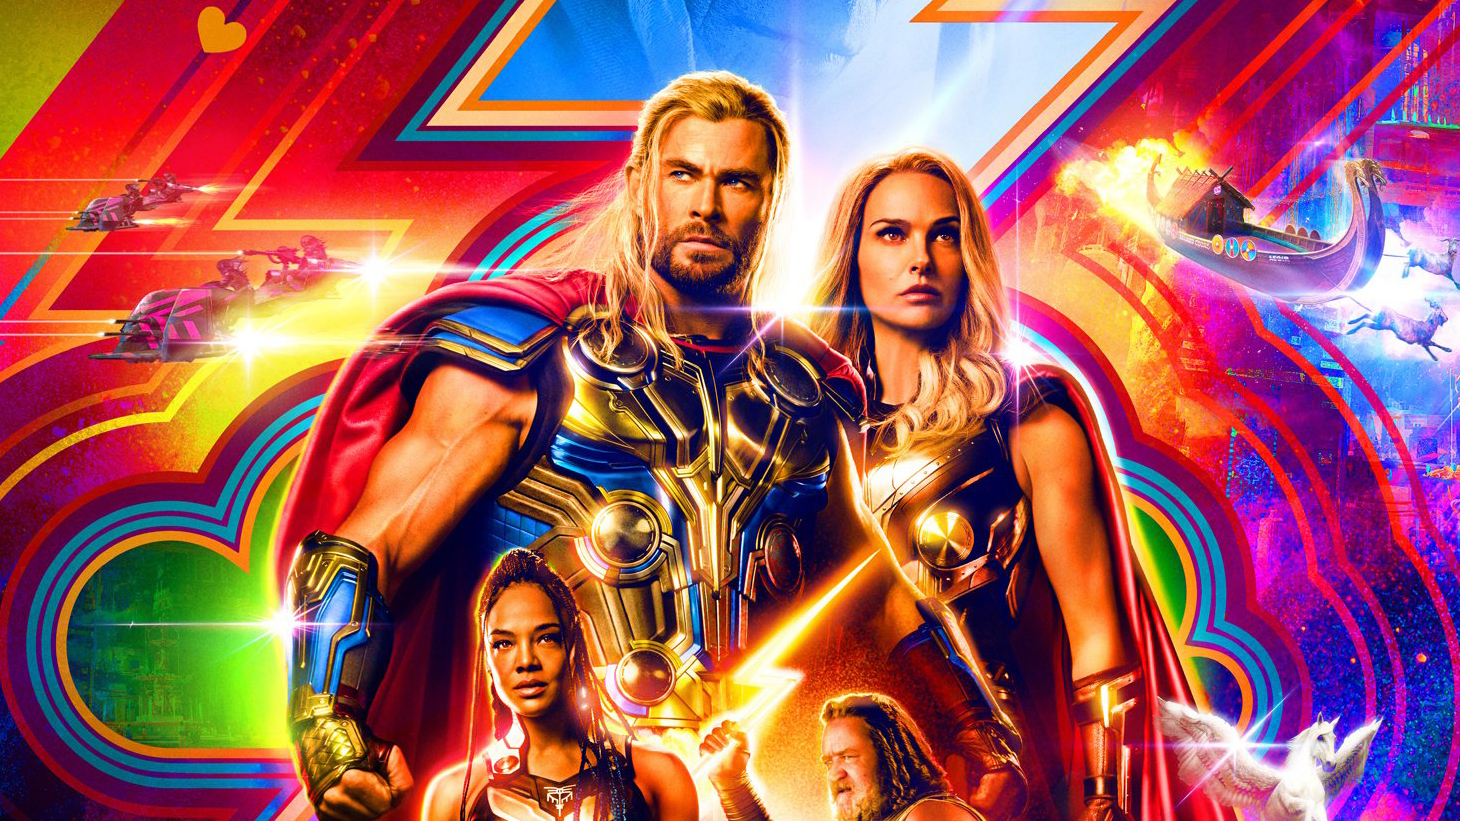 Chris Hemsworth as Thor, Natalie Portman as Jane Foster / The Mighty Thor, Tessa Thompson as King Valkyrie and Russell Crowe as Zeus in Thor: The Love and Thunder Poster Art